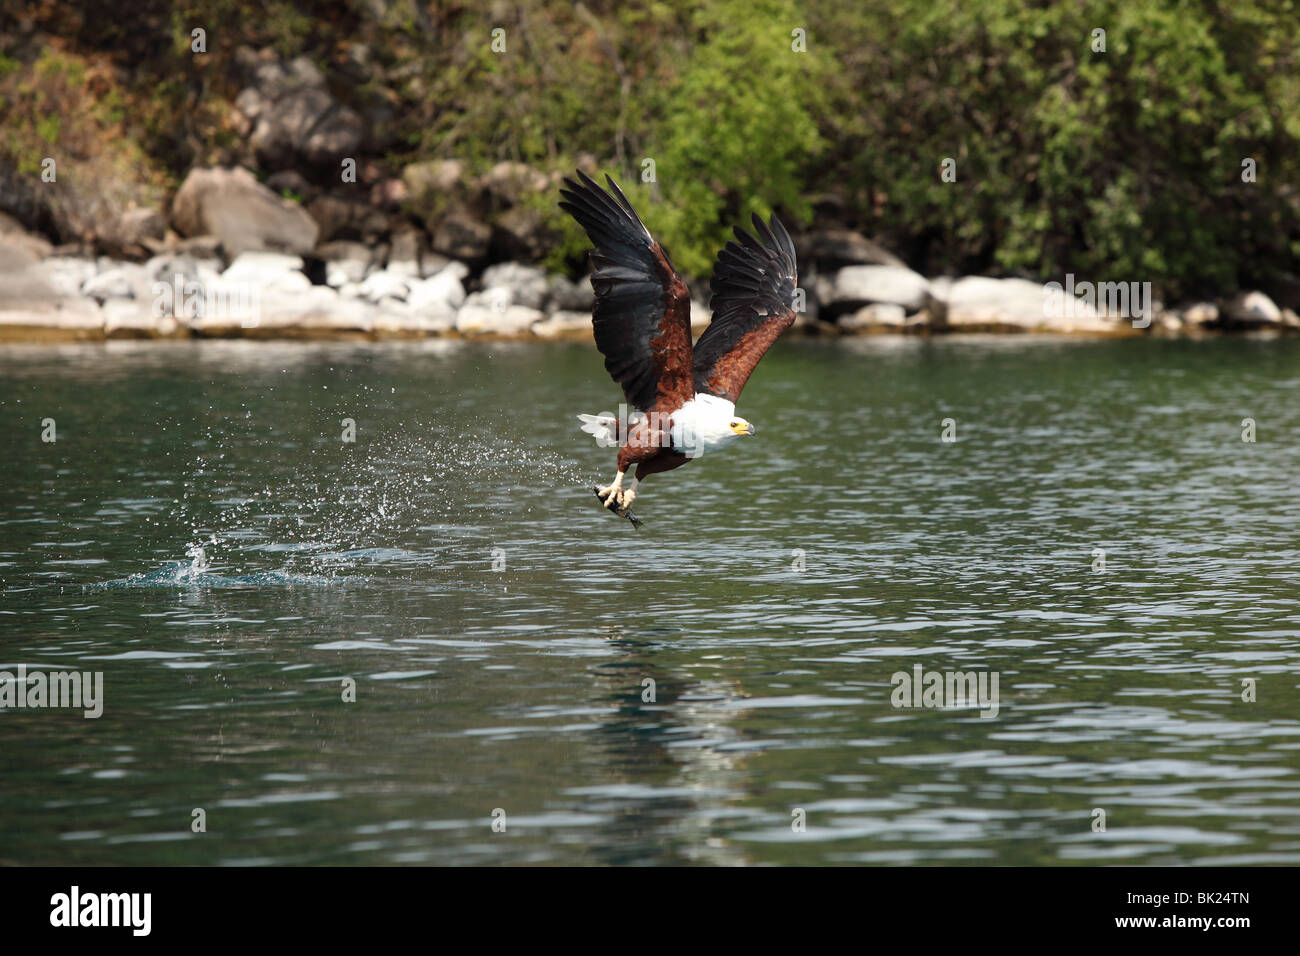 An African Fish Eagle flies and catches fish from Lake Malawi near Cape Maclear in Malawi Stock Photo